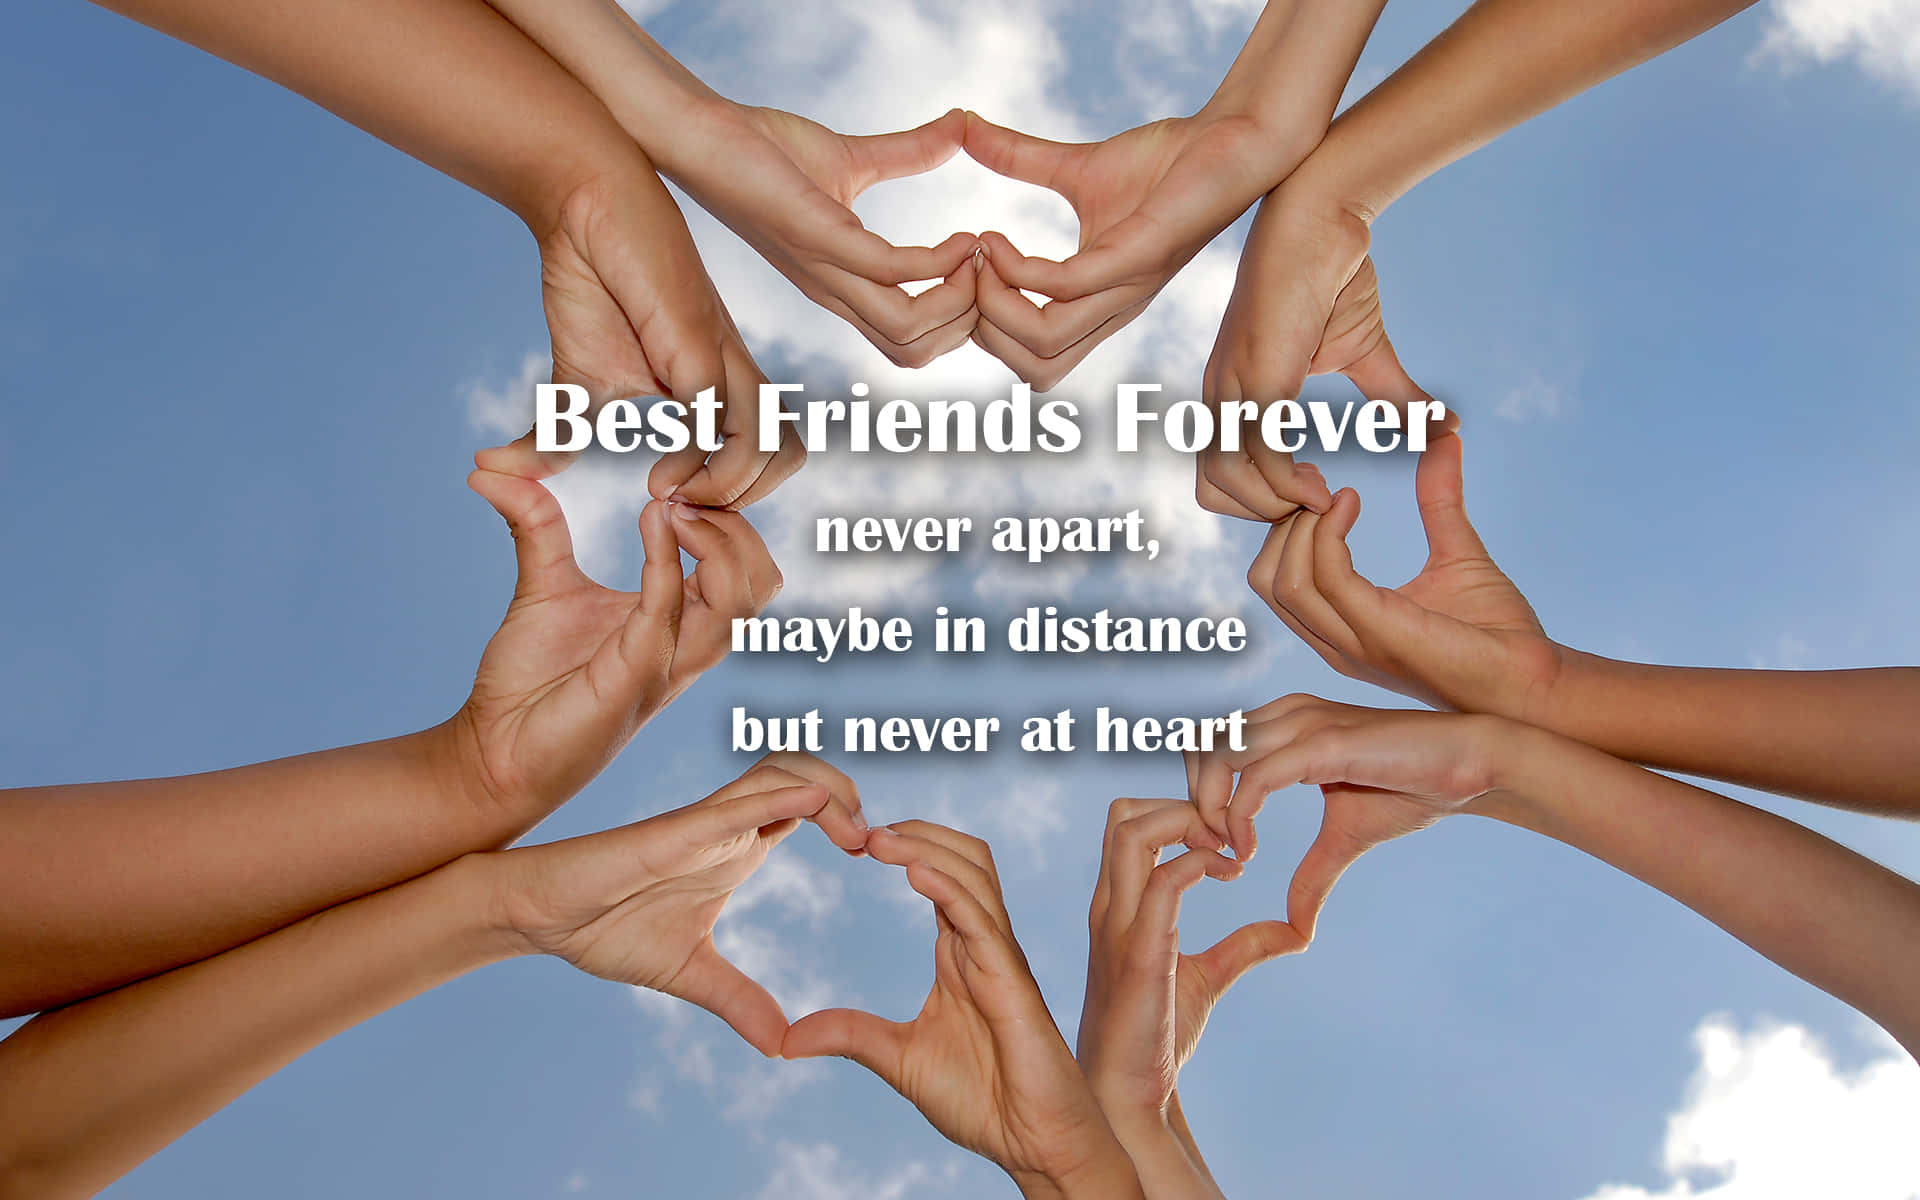 friends holding hands quotes